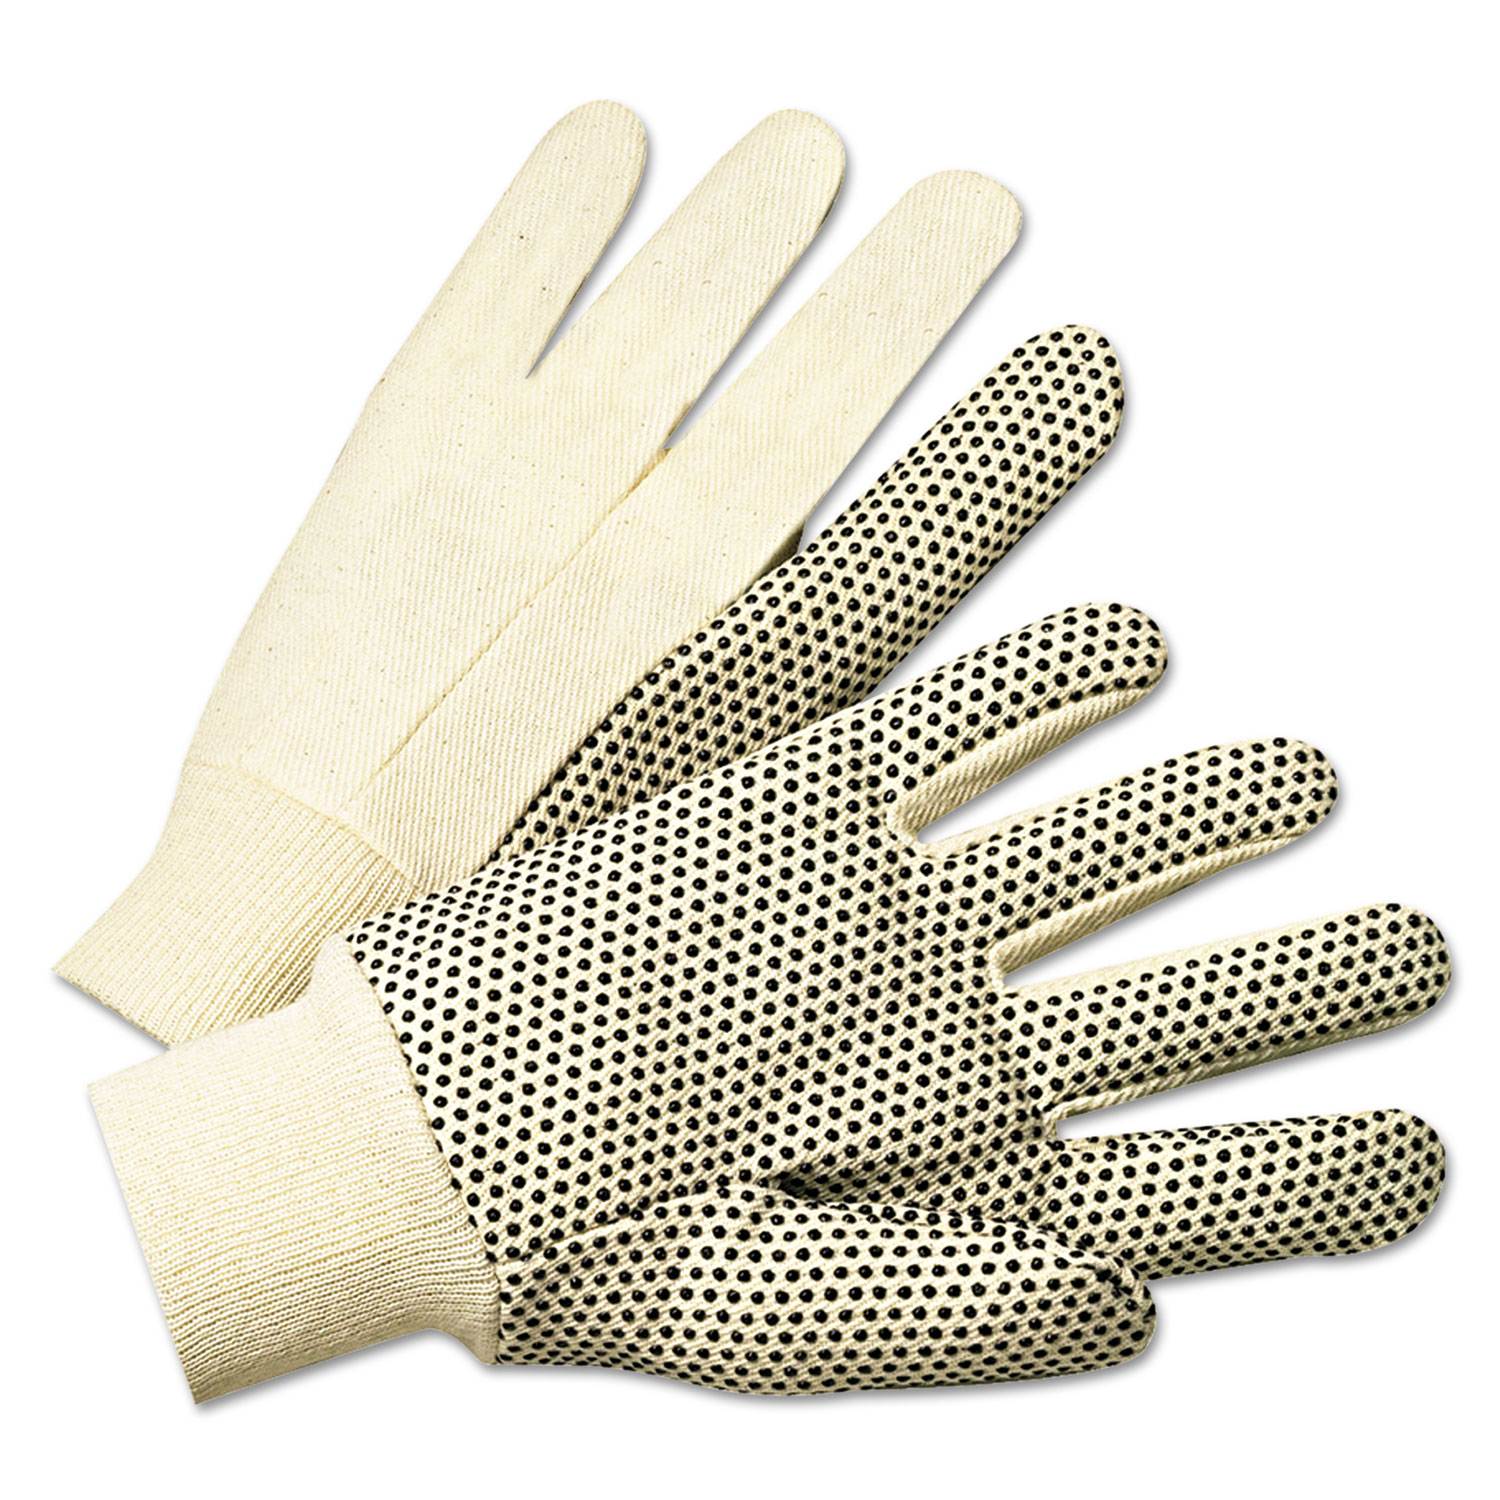  Anchor Brand 781K PVC-Dotted Canvas Gloves, White, One Size Fits All, 12 Pairs (ANR1000) 